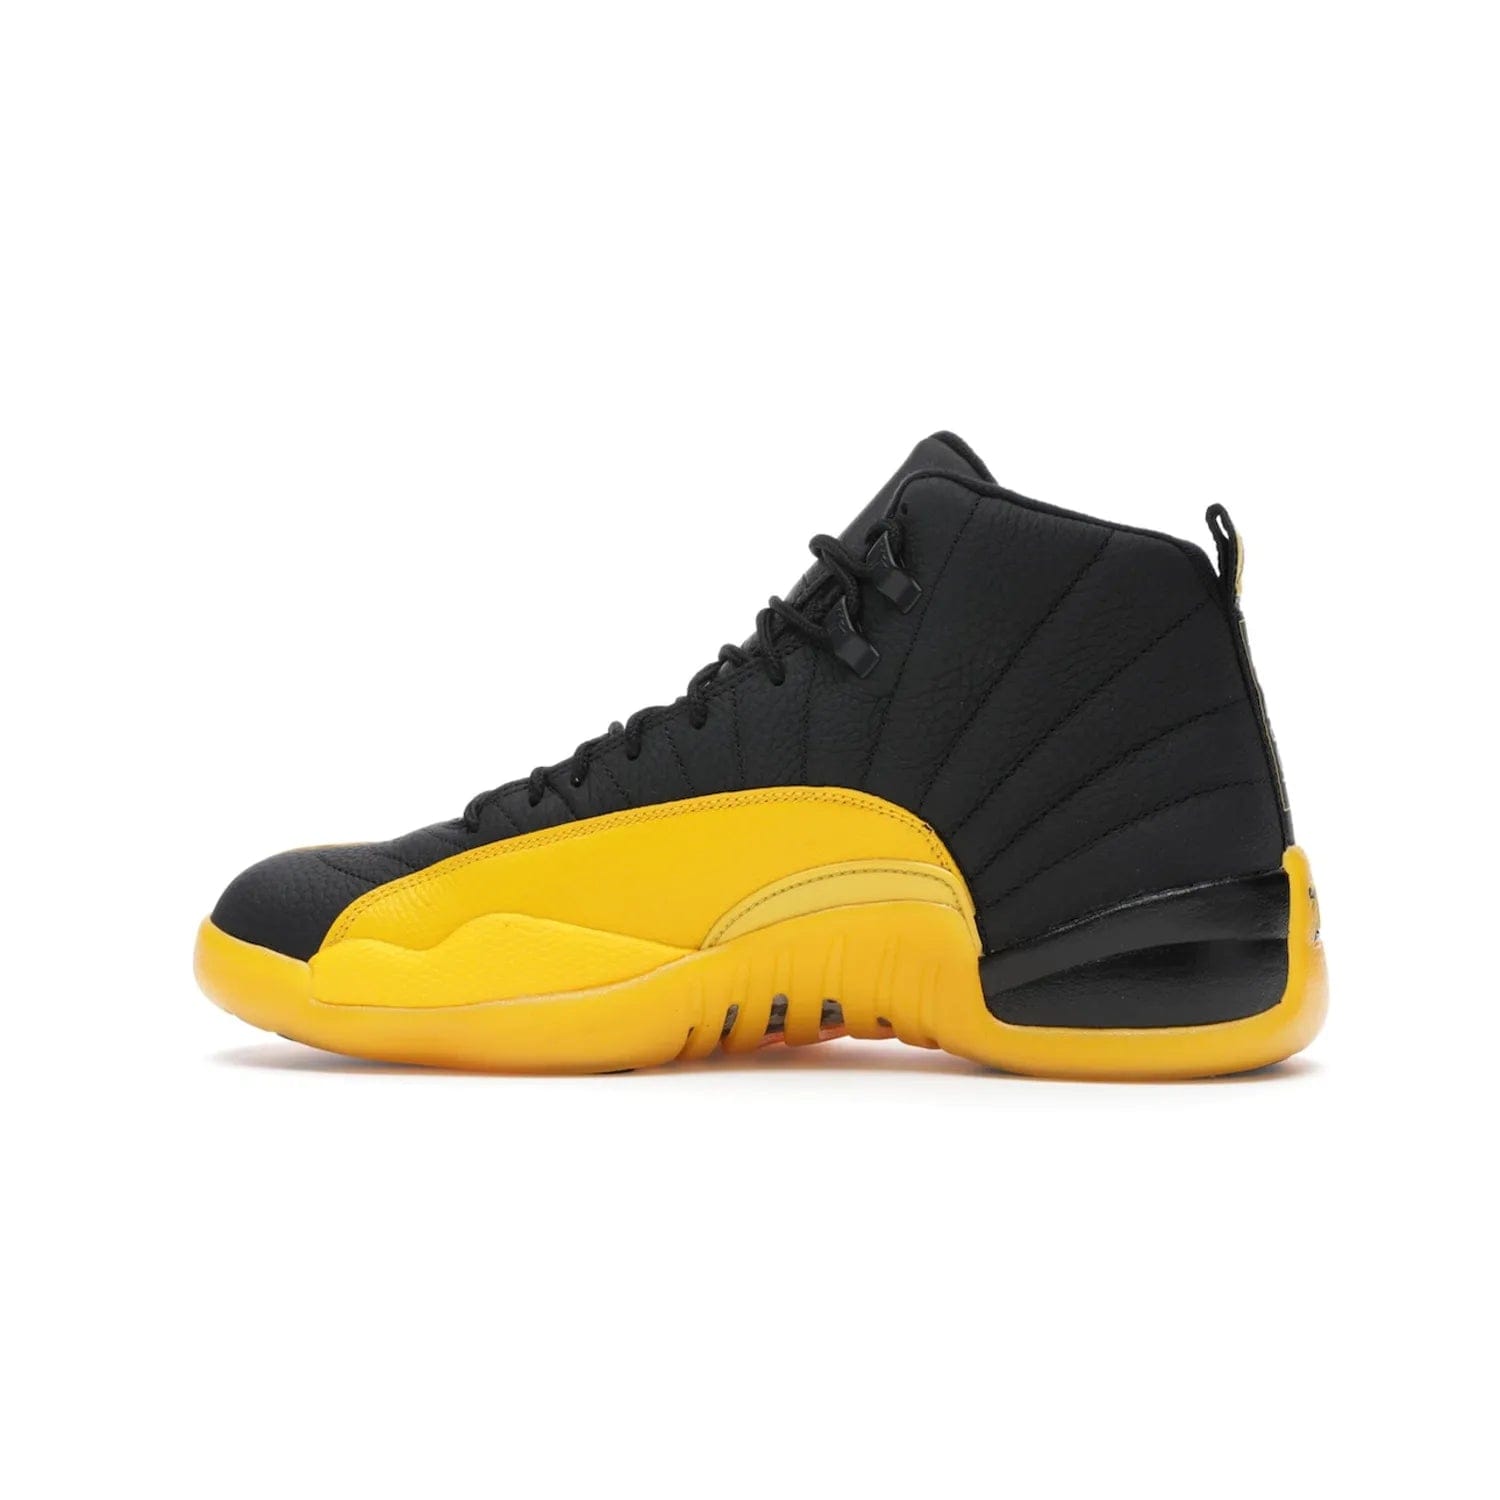 Jordan 12 Retro Black University Gold - Image 20 - Only at www.BallersClubKickz.com - This Jordan 12 Retro features a black tumbled leather upper and University Gold accents for a modern twist. Boasting Jordan "Two Three" branding and a yellow sole, these shoes will elevate your wardrobe. Fresh, sleek, and one of a kind - the Jordan 12 University Gold is your summer sneaker.